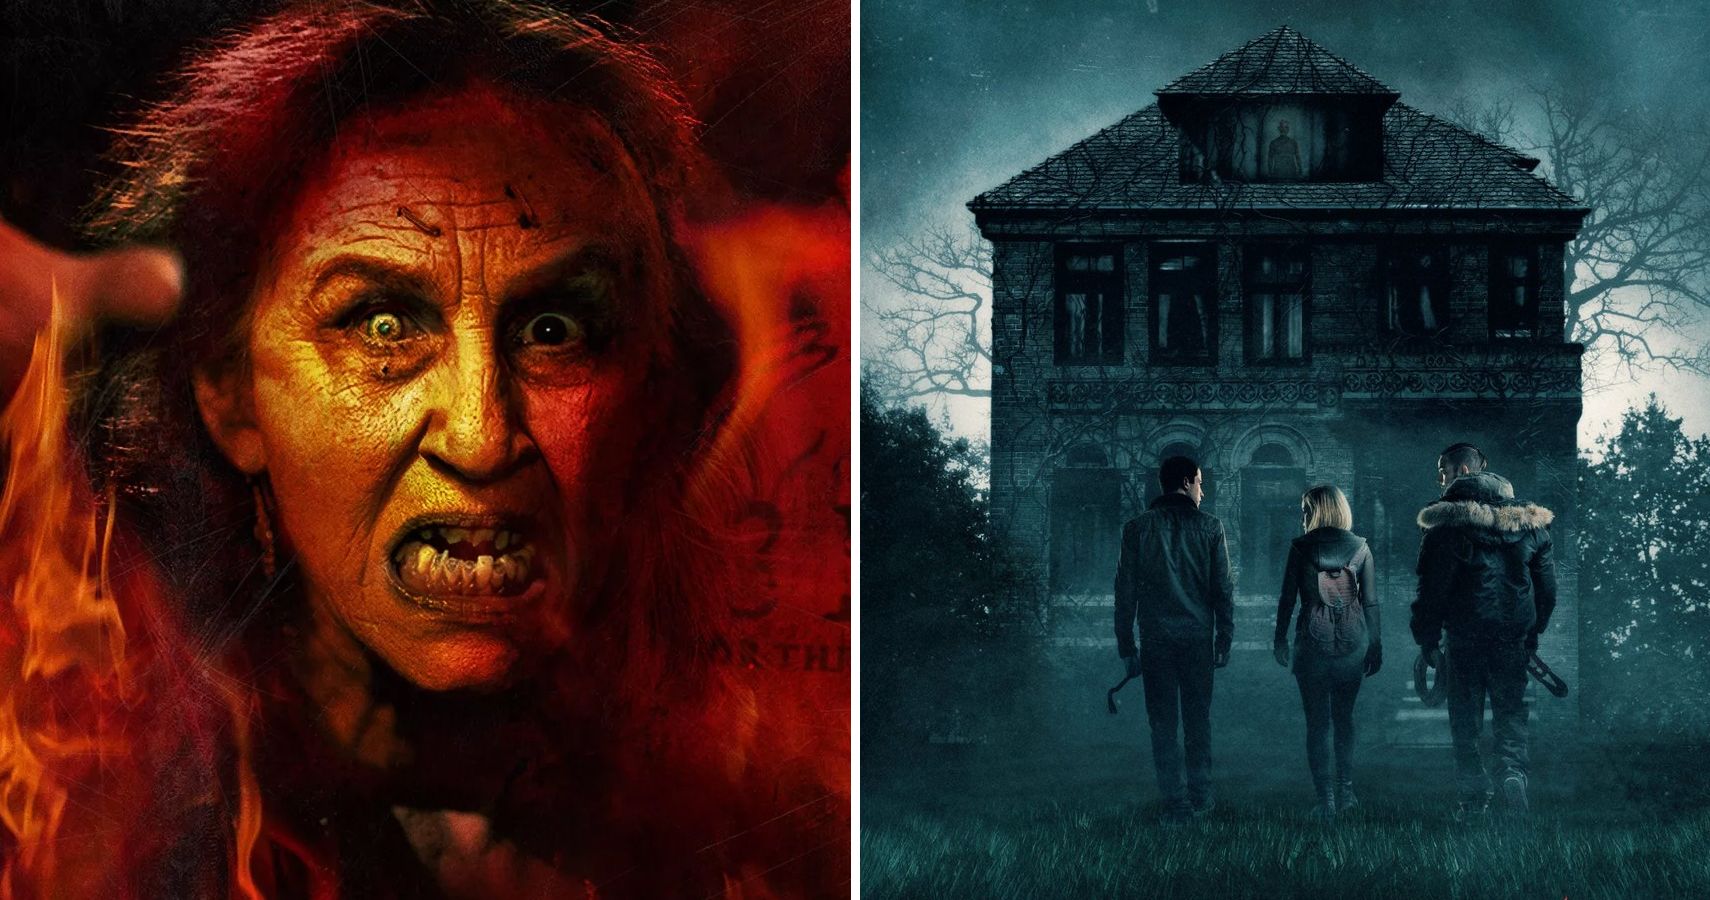 The 10 Best Horror Films From Ghost House Pictures, According To IMDb